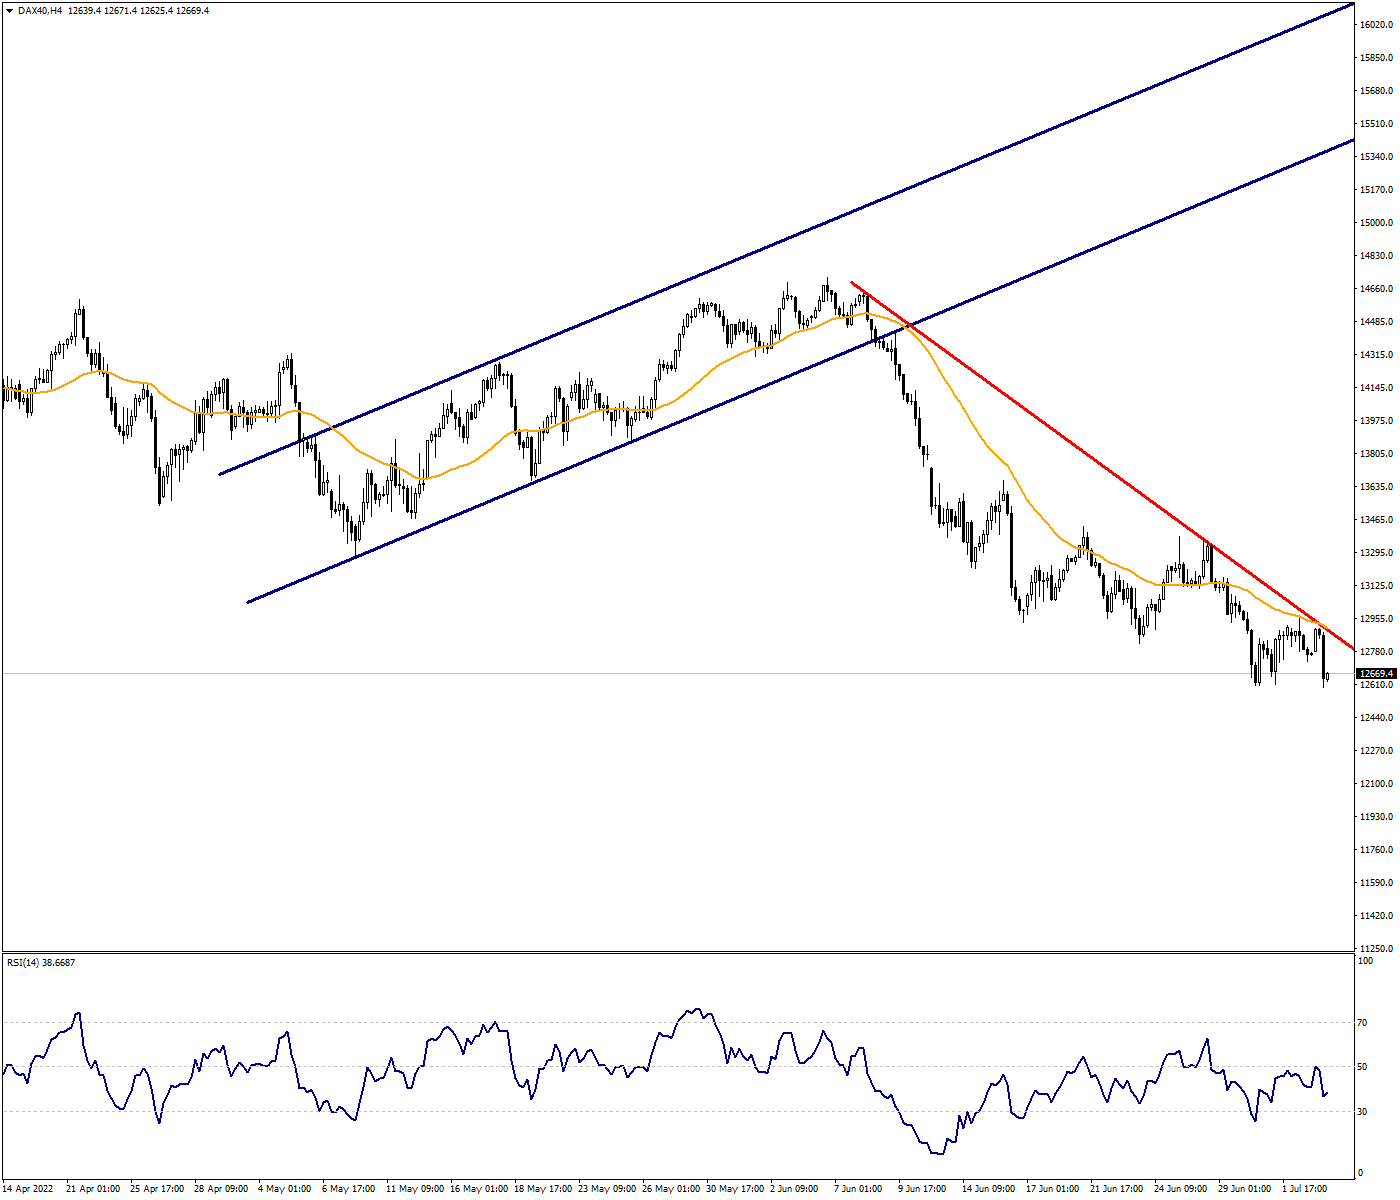 DAX40:The Decline in Index May Continue